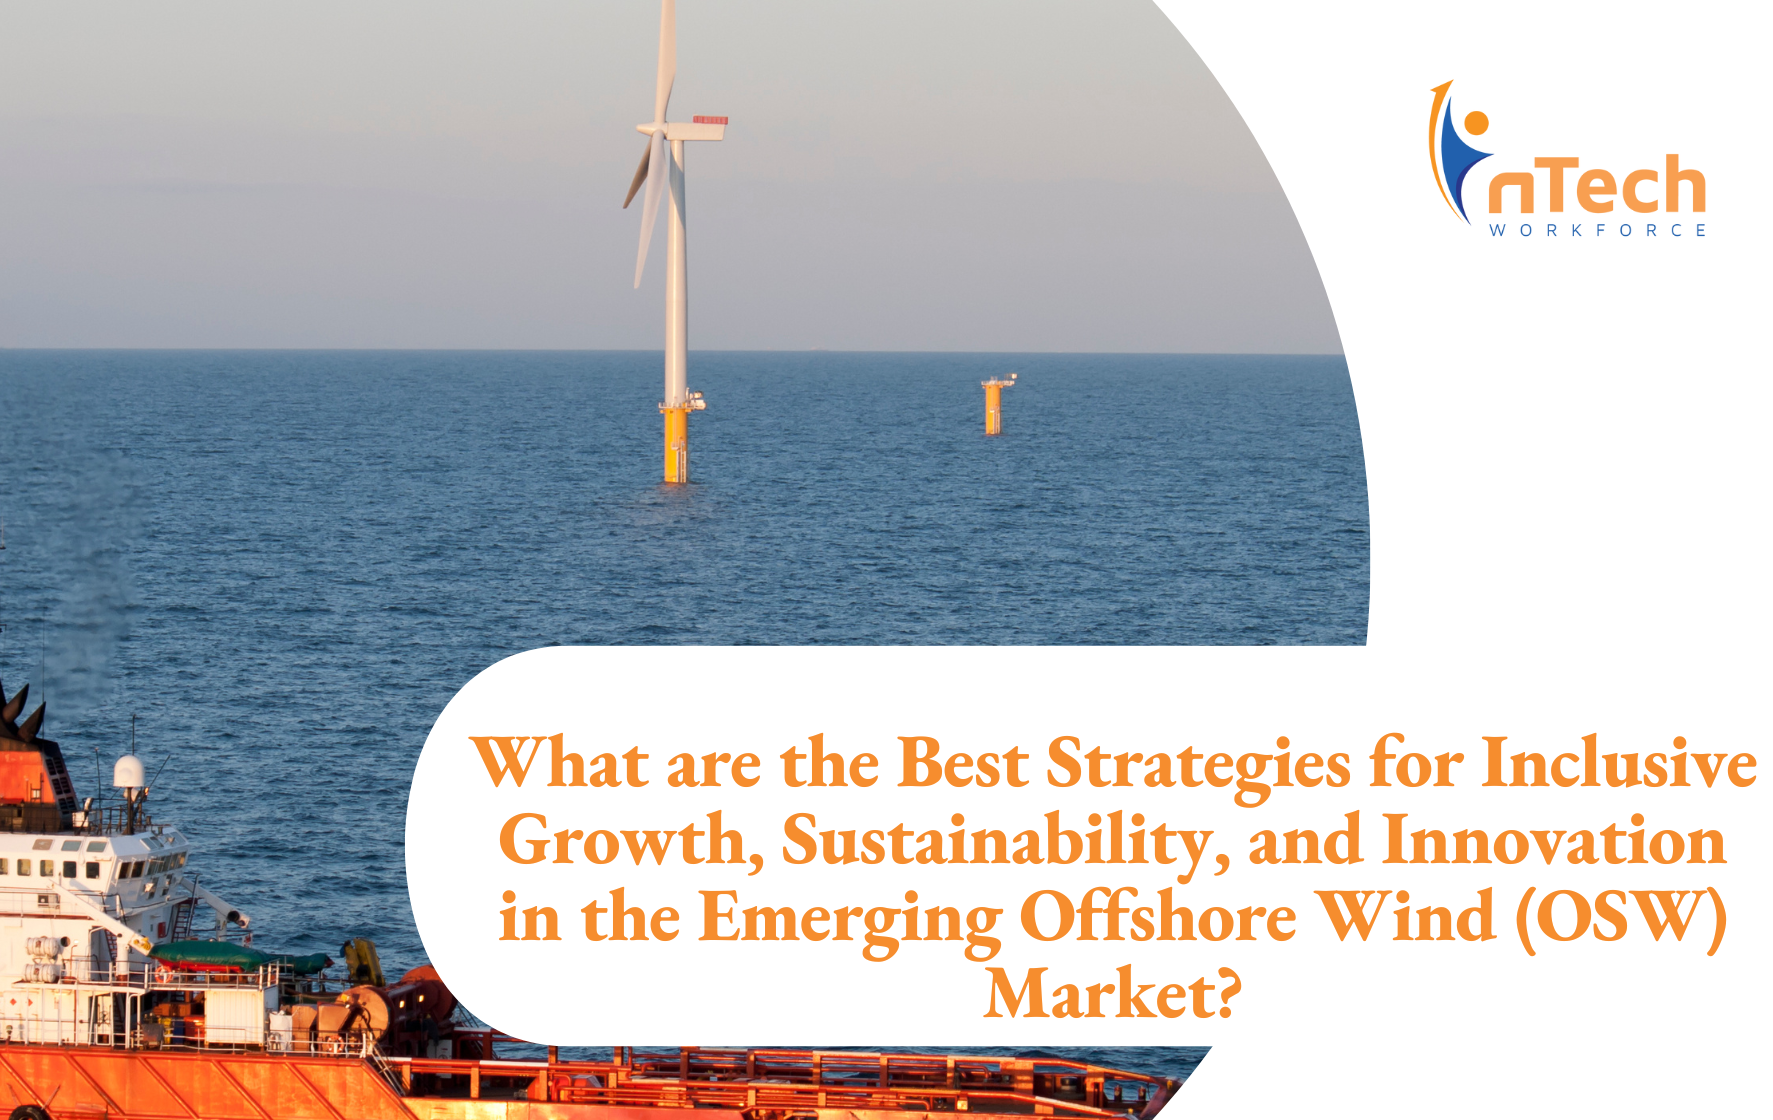 What are the Best Strategies for Inclusive Growth, Sustainability, and Innovation in the Emerging Offshore Wind (OSW) Market?